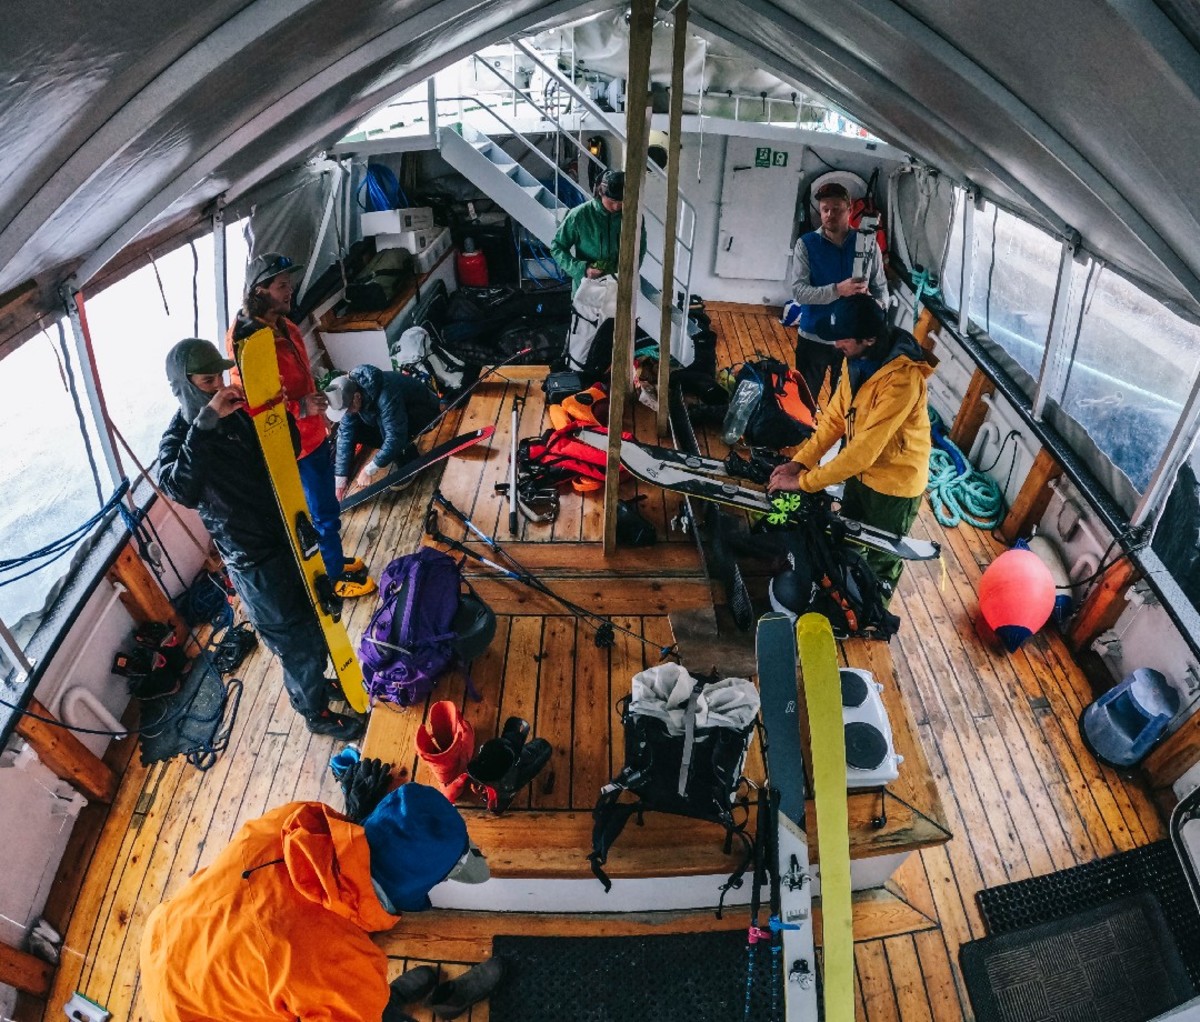 Guys gather in the boat galley preparing for a ski day.